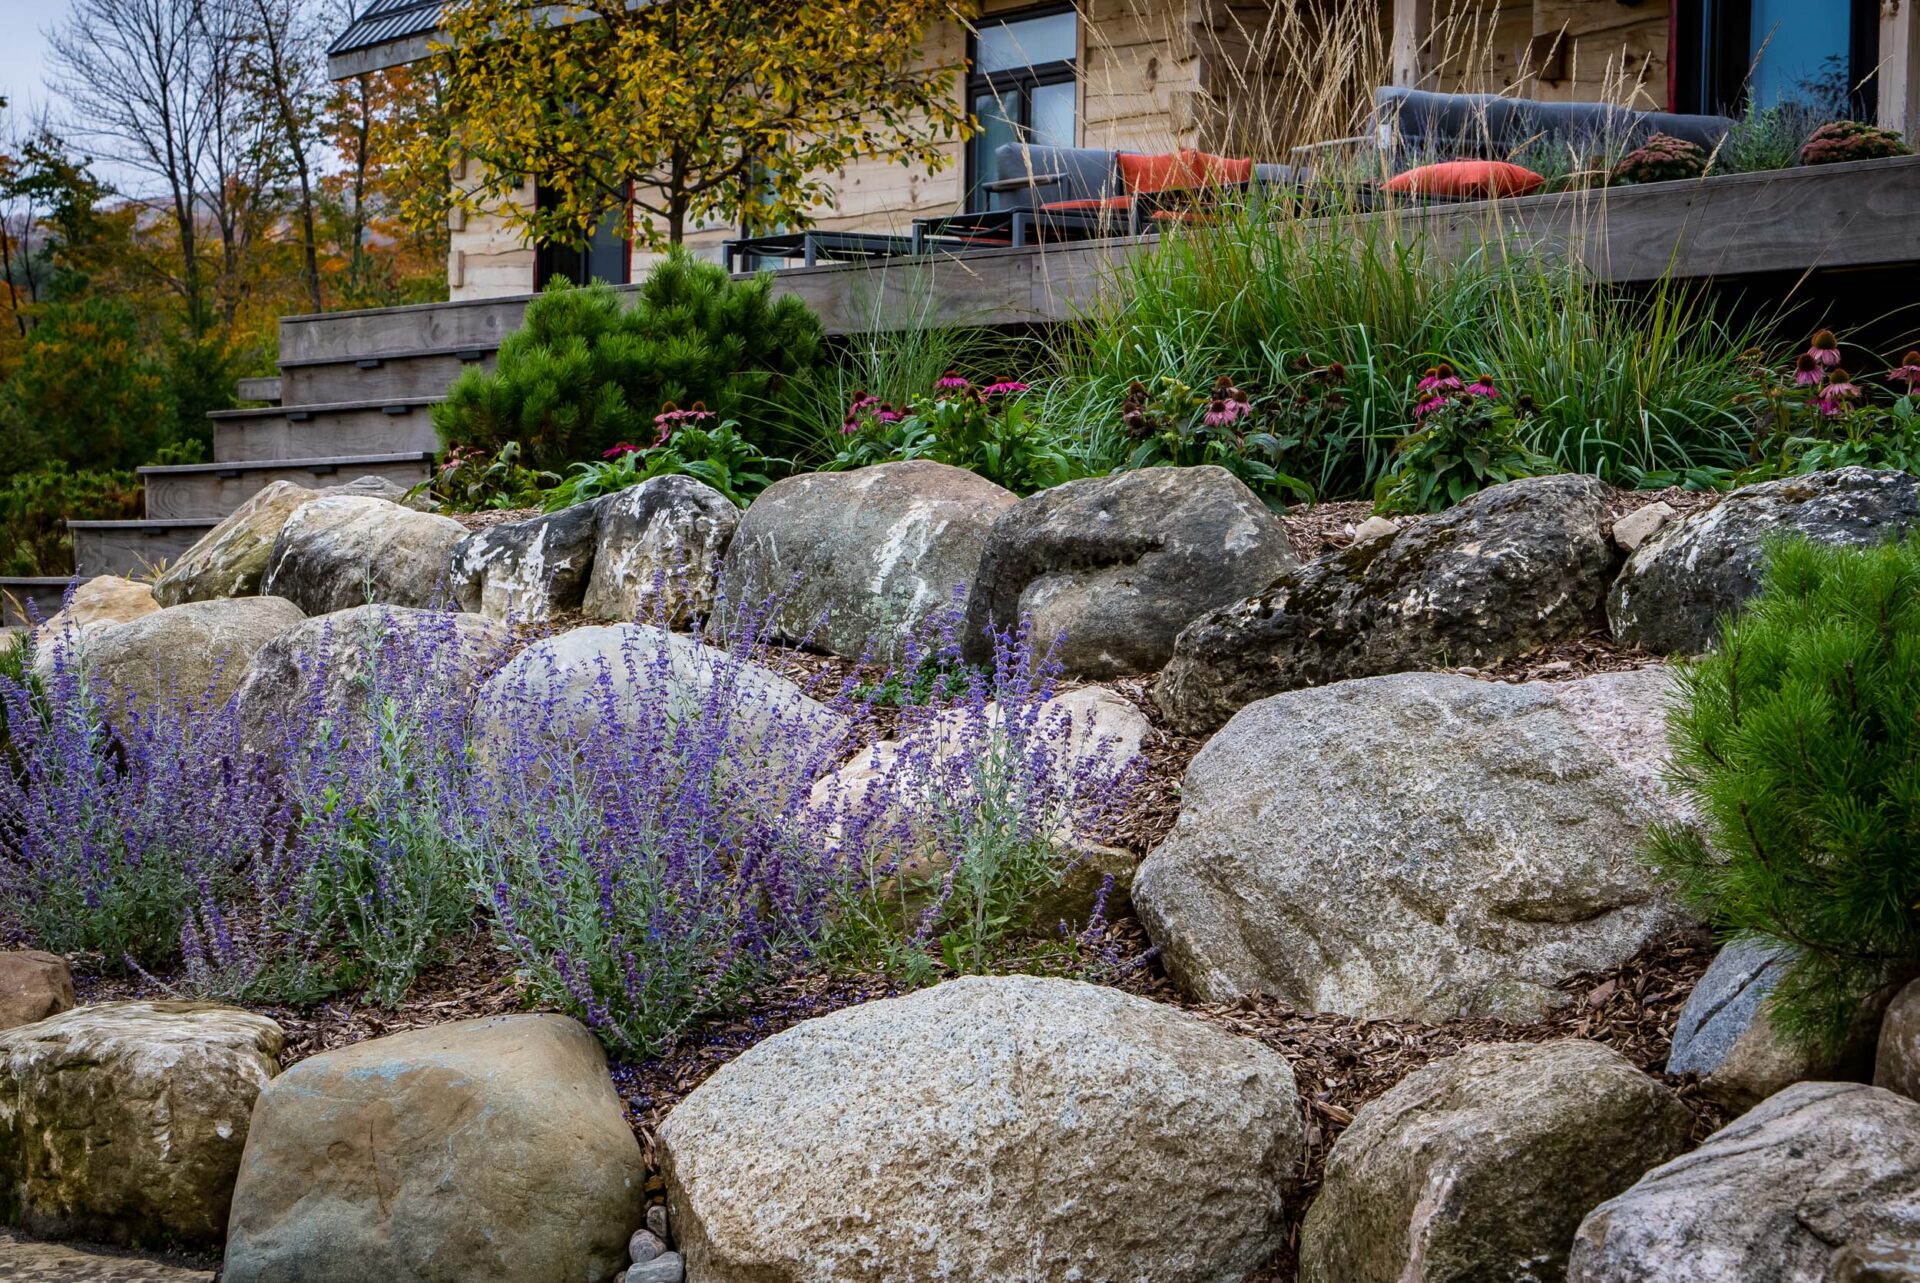 A landscaped garden with large boulders, purple-flowering plants, and green foliage. A building with a patio area is visible in the background.